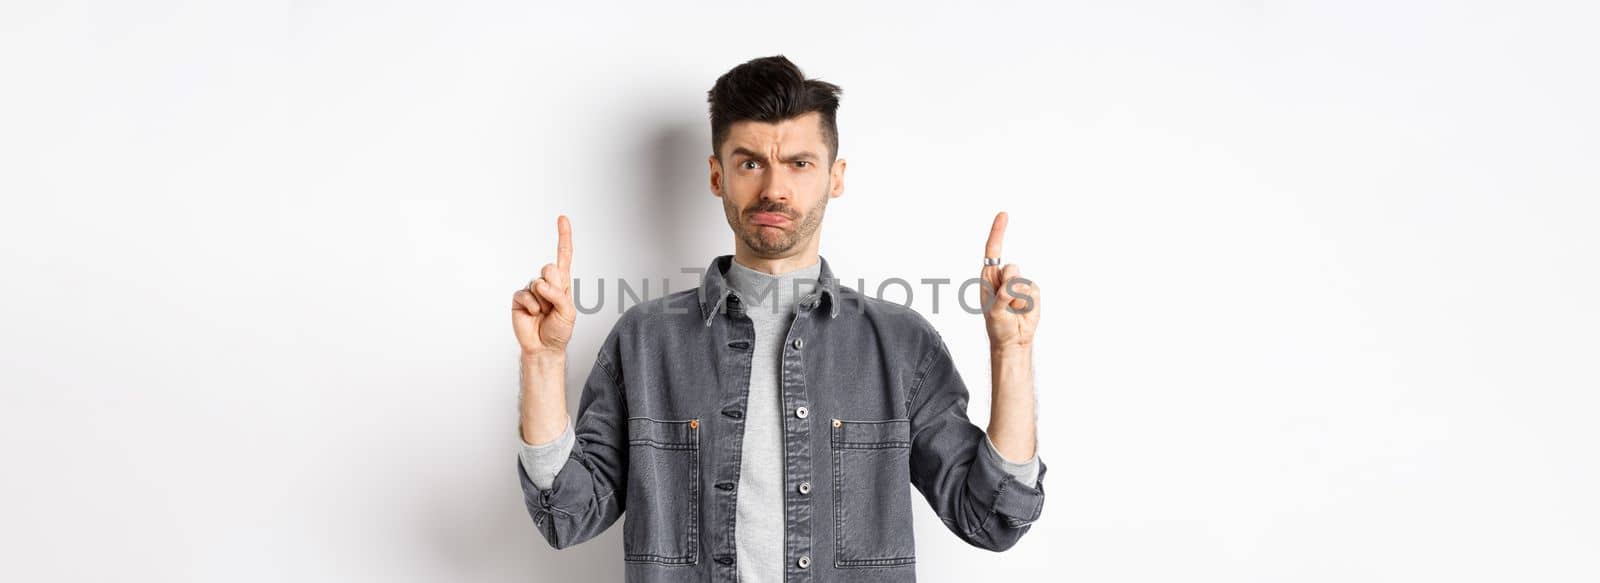 Confused funny guy with moustache pointing fingers up at something strange, frowning and pouting puzzled, standing on white background.